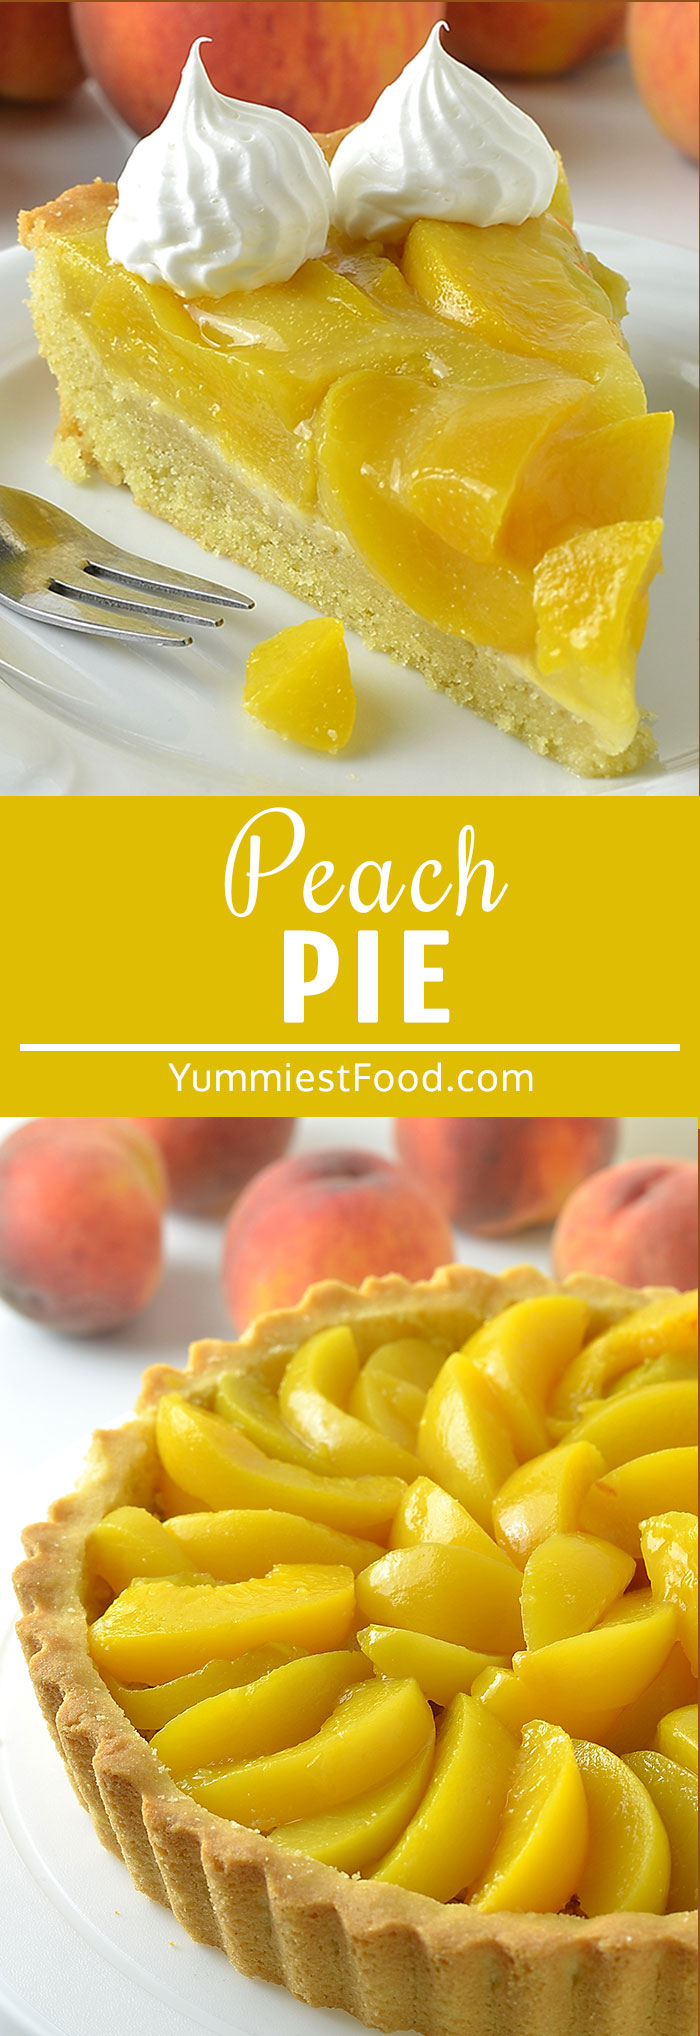 Peach Pie is sweet, creamy and so delicious dessert perfect for any time of the year! Make it with pastry shell, fresh or canned peaches, Peach Jell-O and topped with whipped cream!